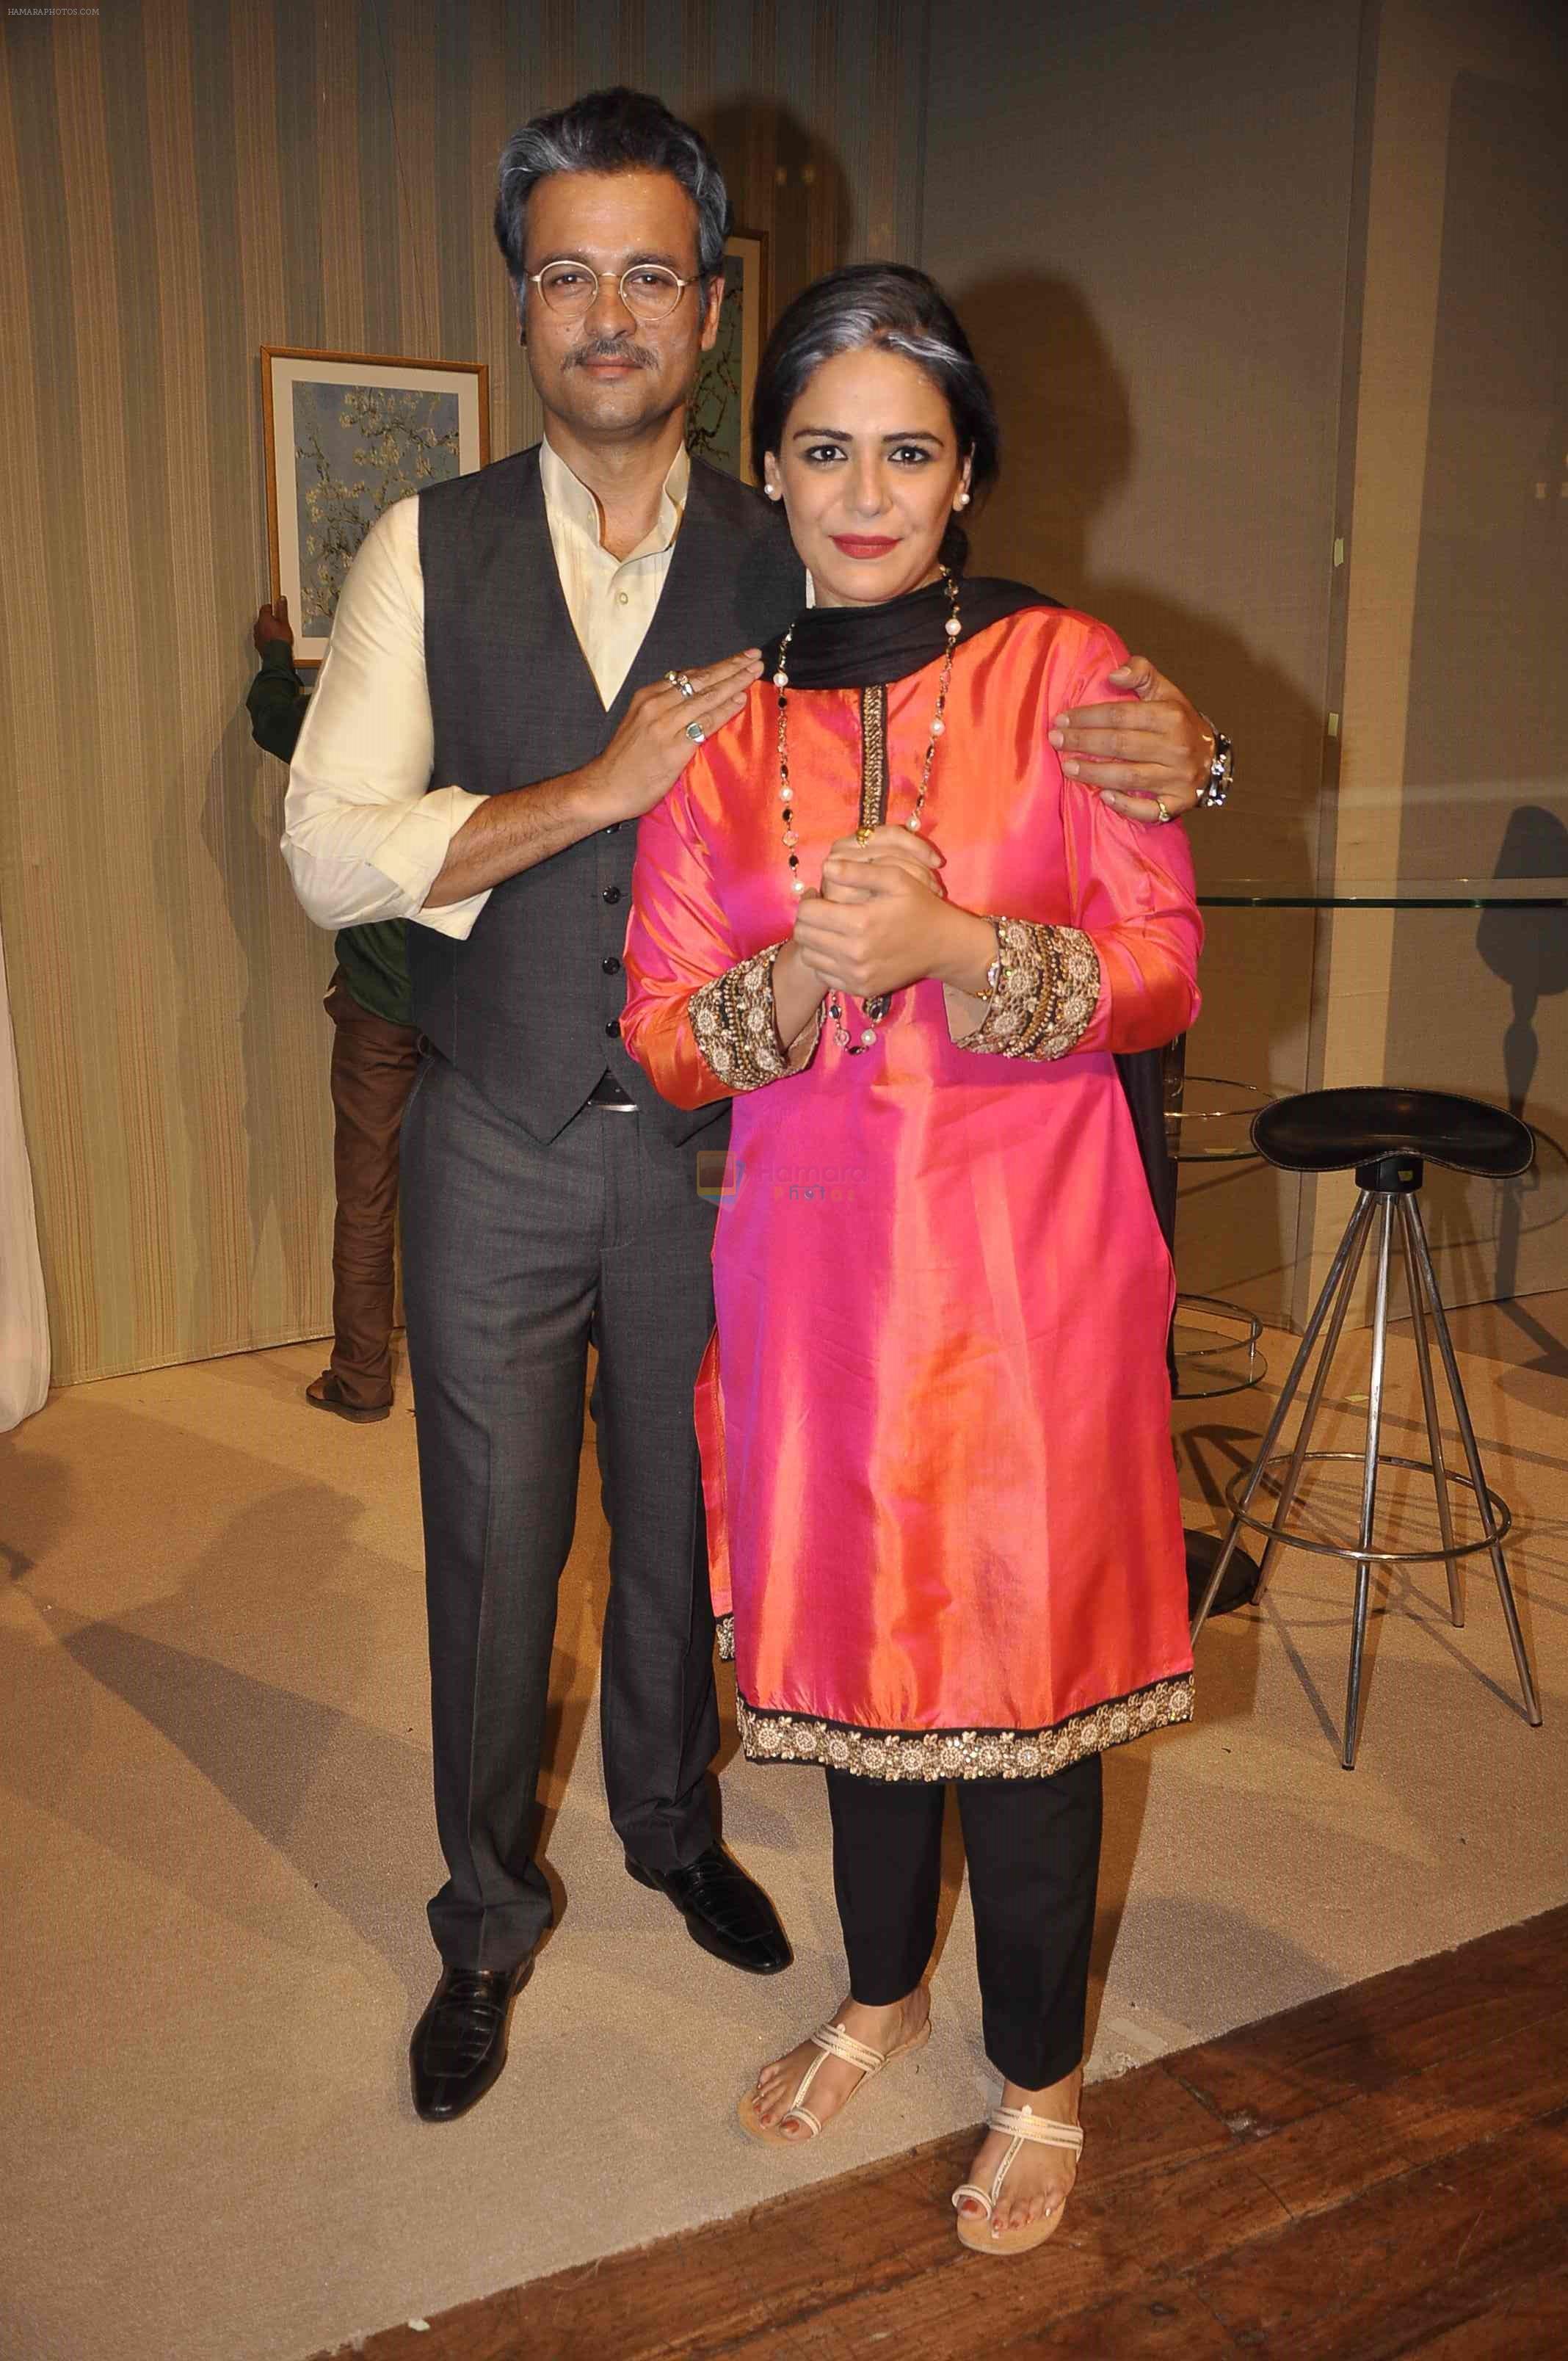 Rohit Roy, Mona Singh at Unfaithfully Yours screening in St Andrews on 15th March 2015